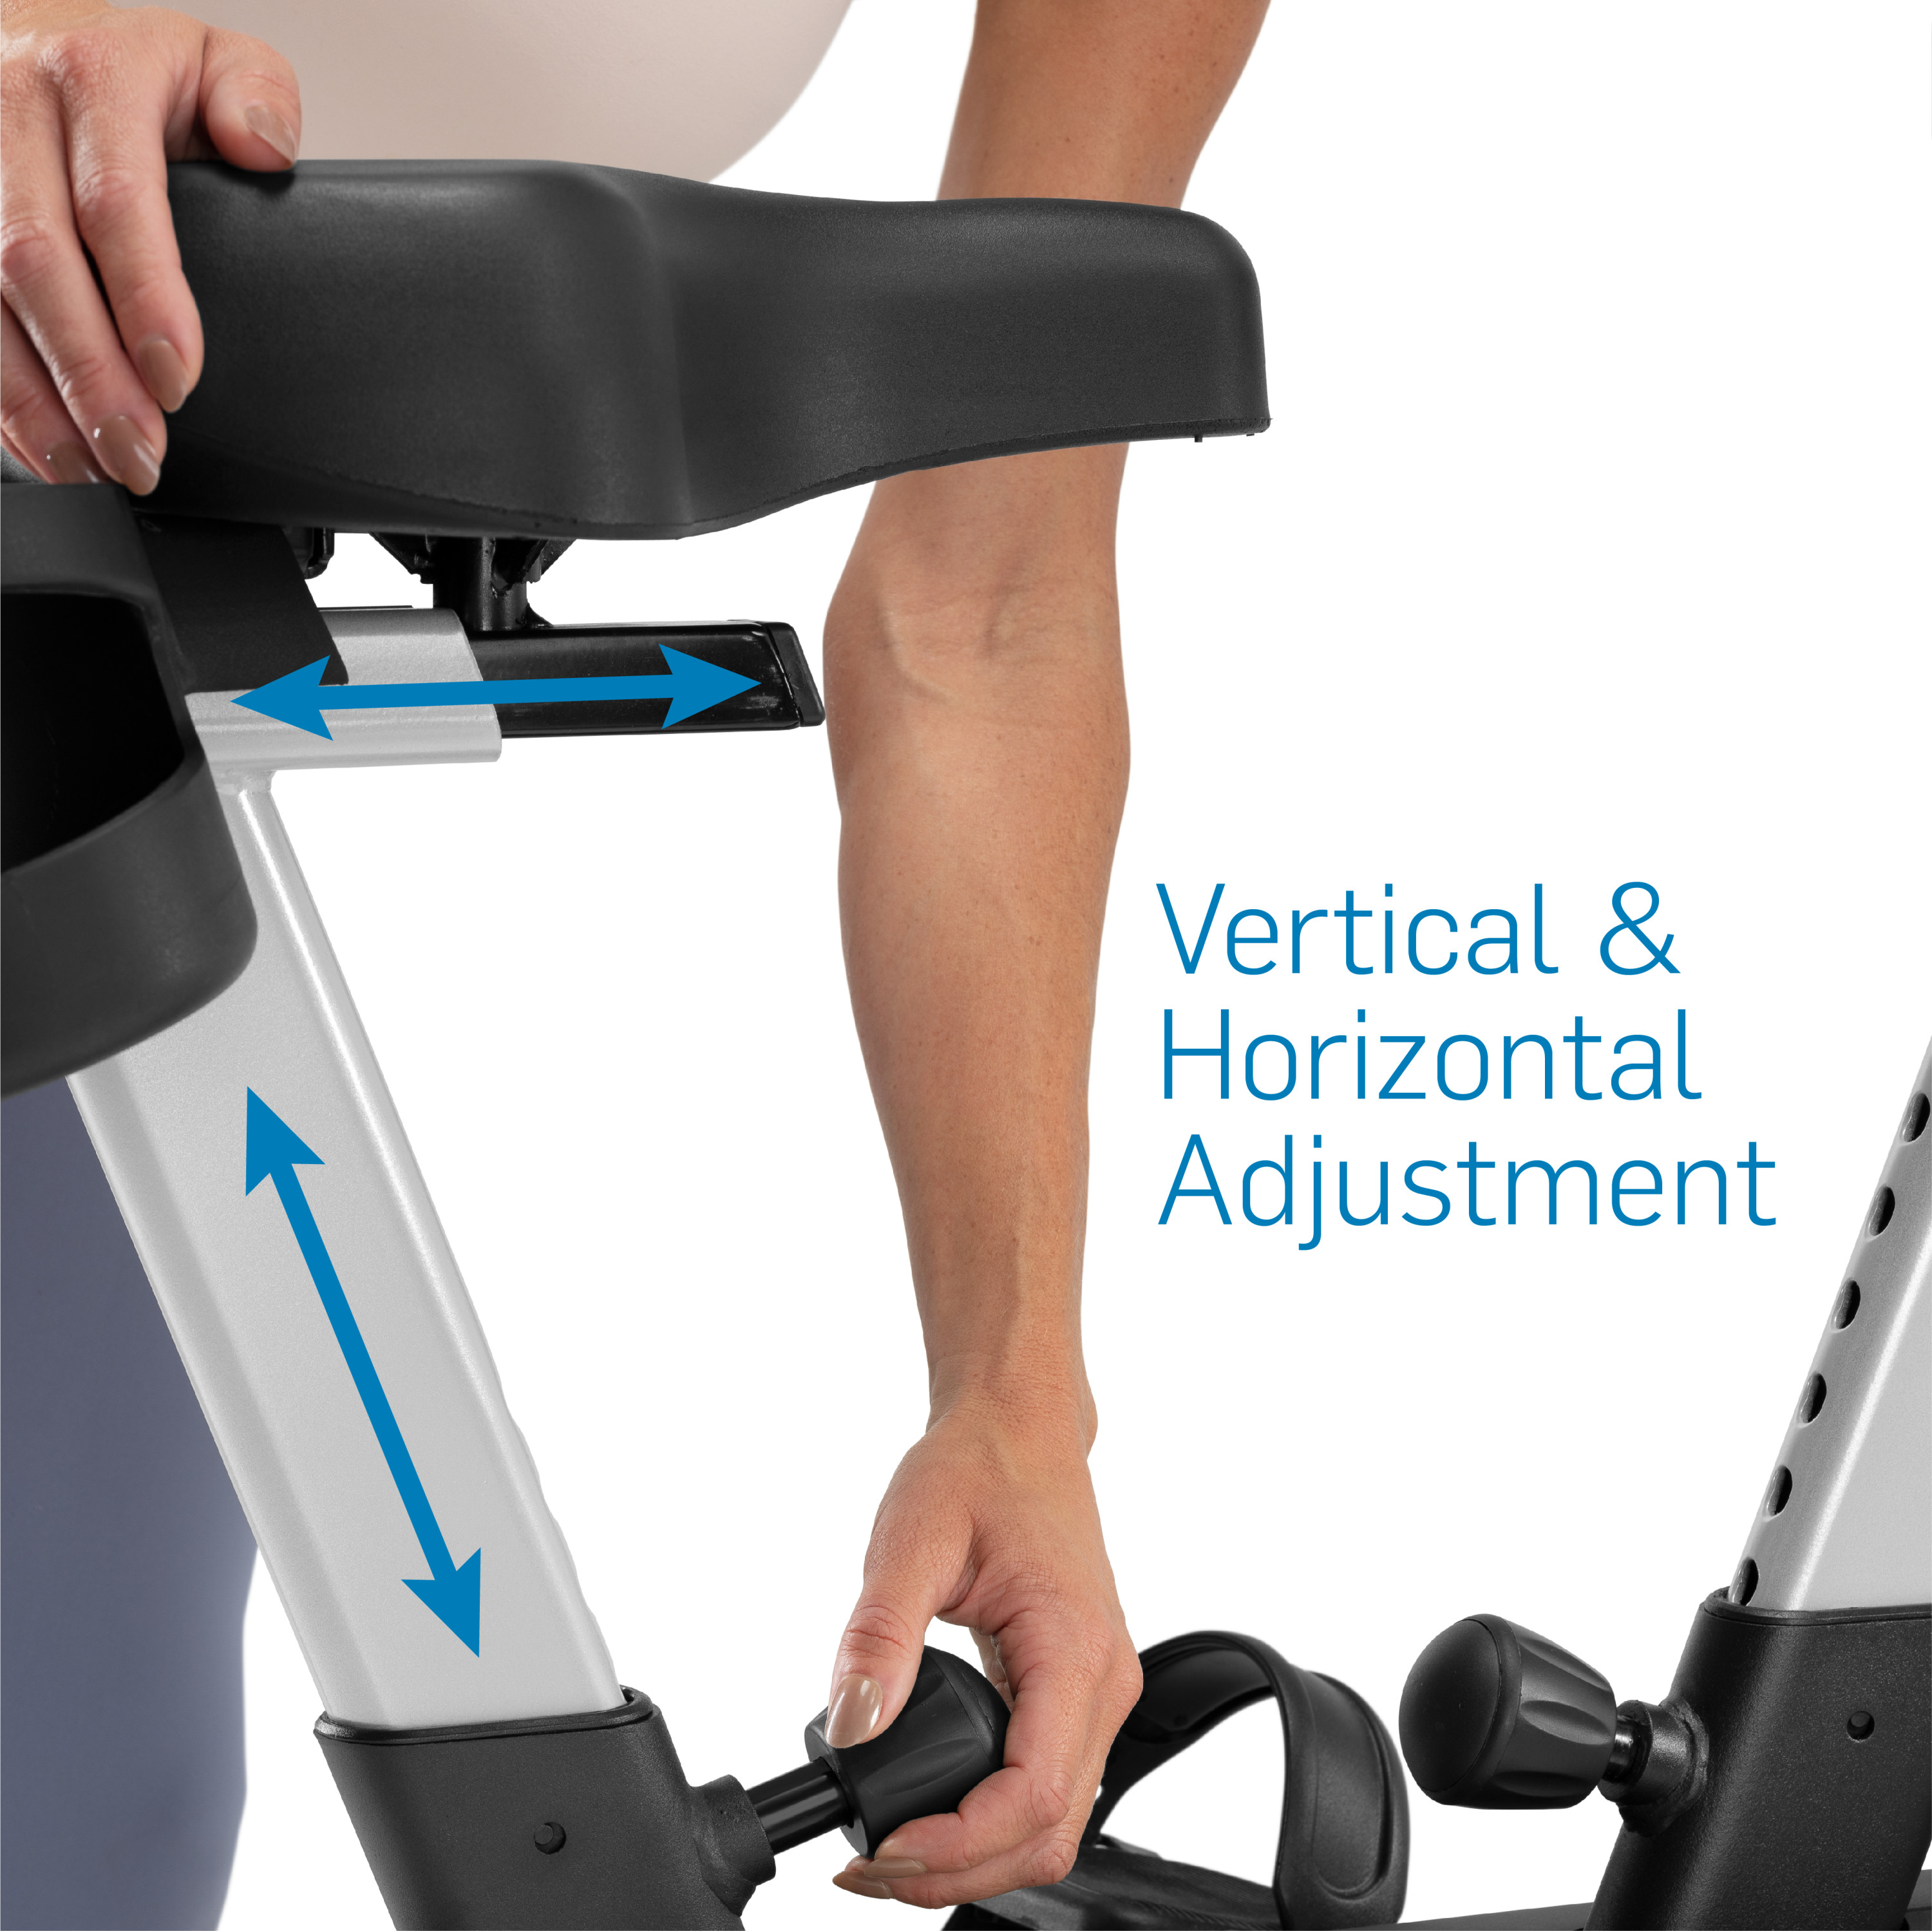 NordicTrack Studio Bike with 7” Smart HD Touchscreen and 30-Day iFIT Family Membership - image 4 of 22